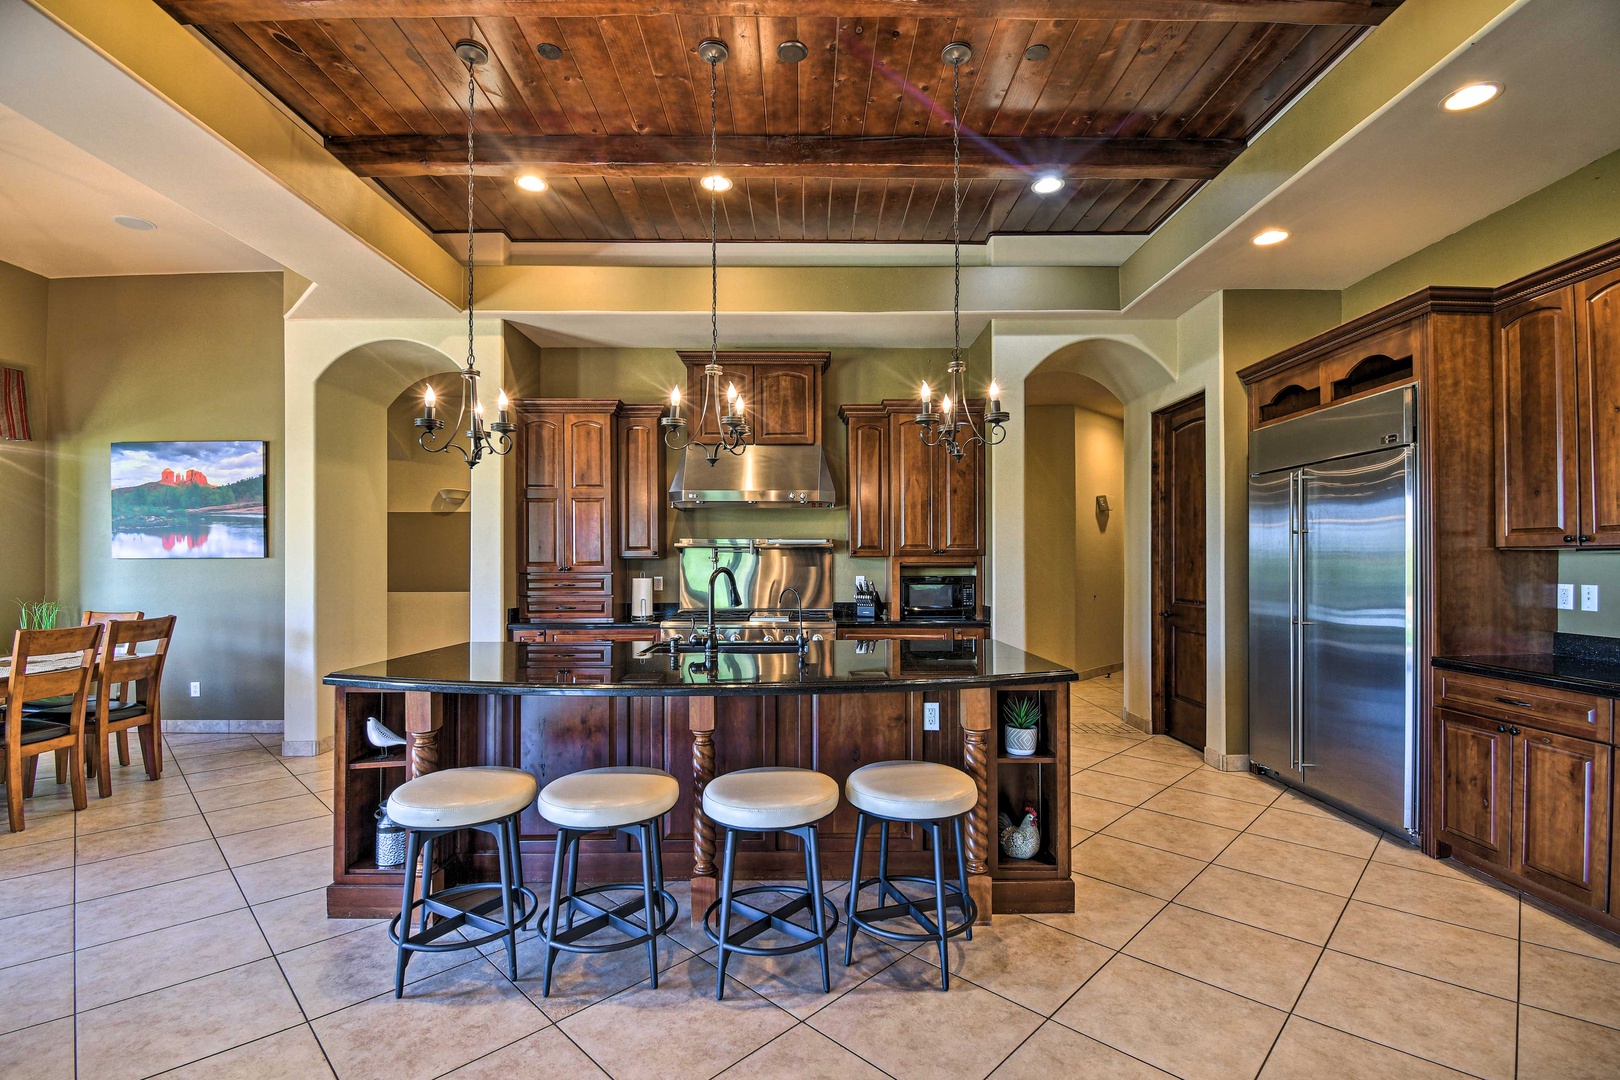 The gorgeous, updated kitchen offers ample space & all the comforts of home